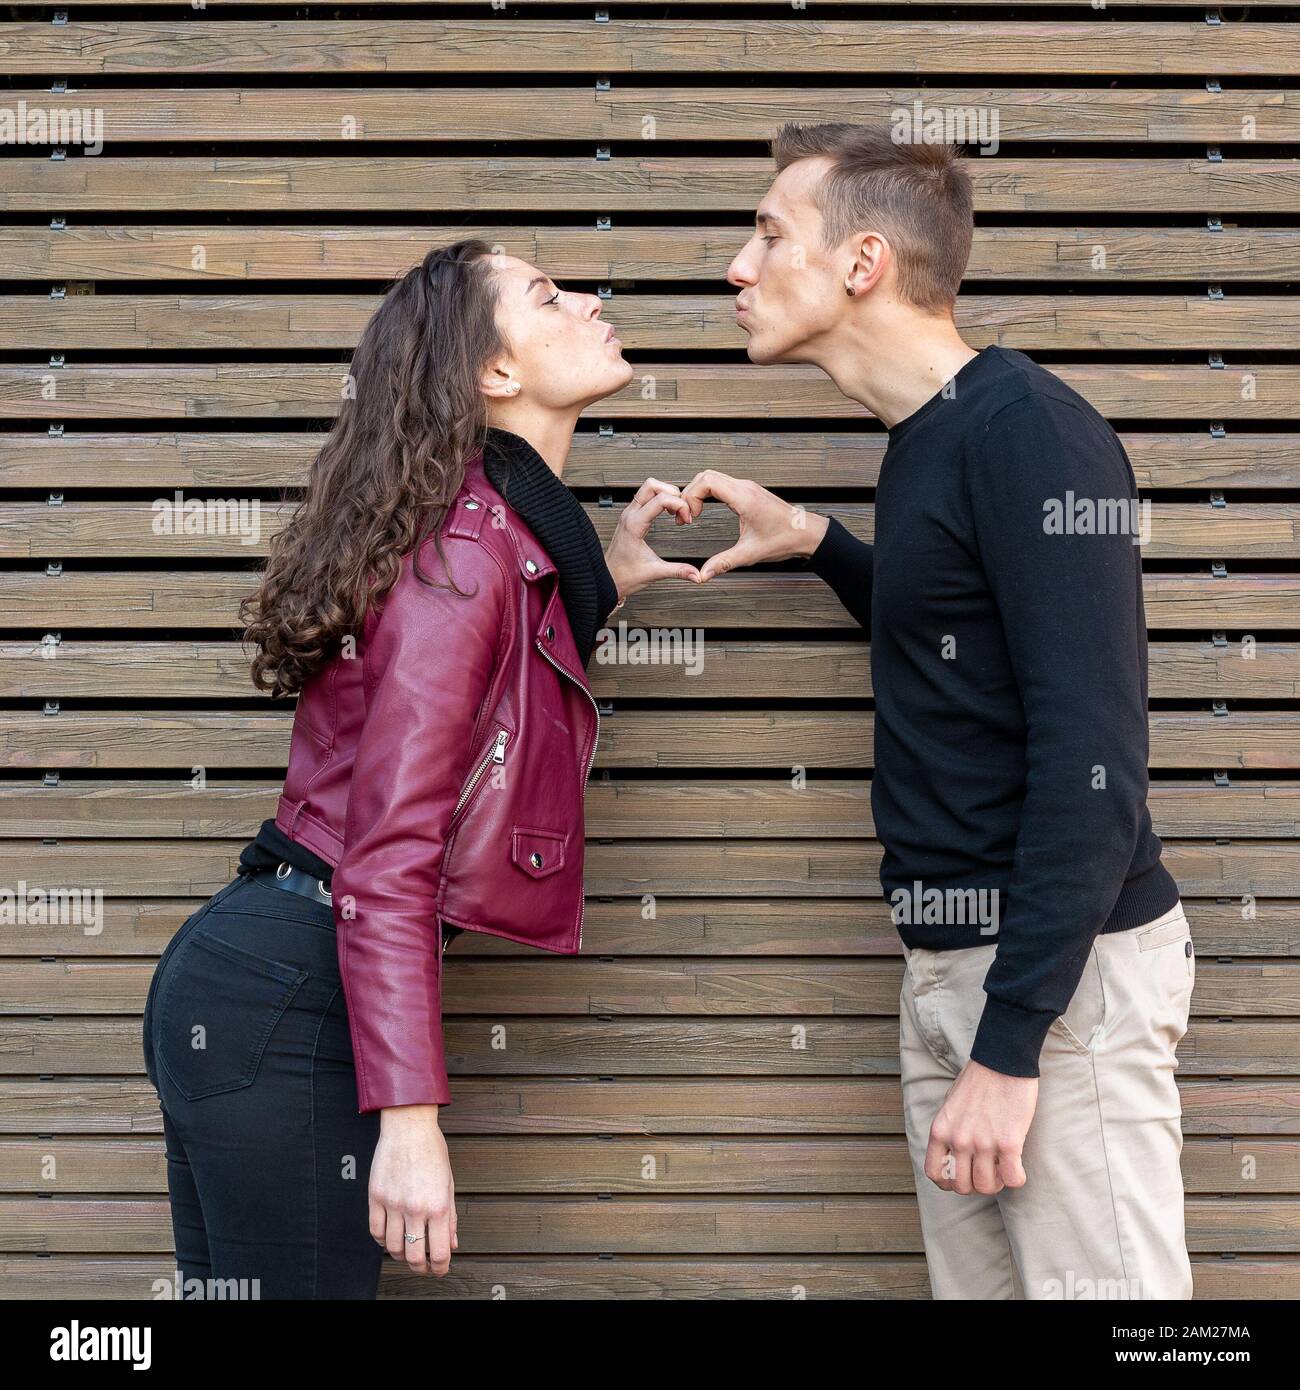 Young couple in love makes the shape of the heart with their hands while they kiss each other's. sweethearts. Love story, Valentine's Day concept Stock Photo